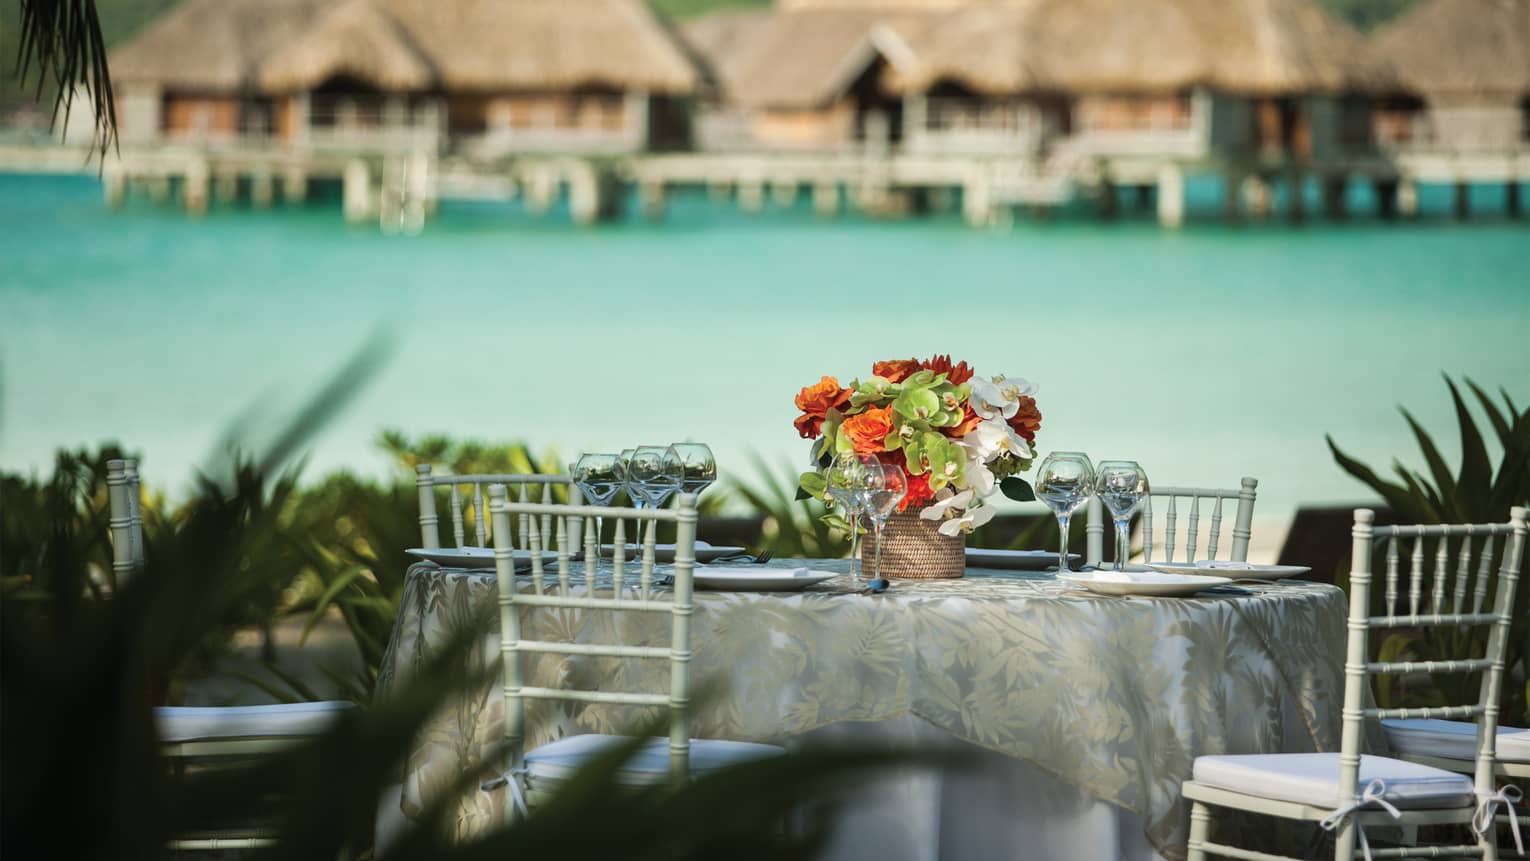 Outdoor formal dining table with fresh flower arrangement, ocean and overwater bungalows in background